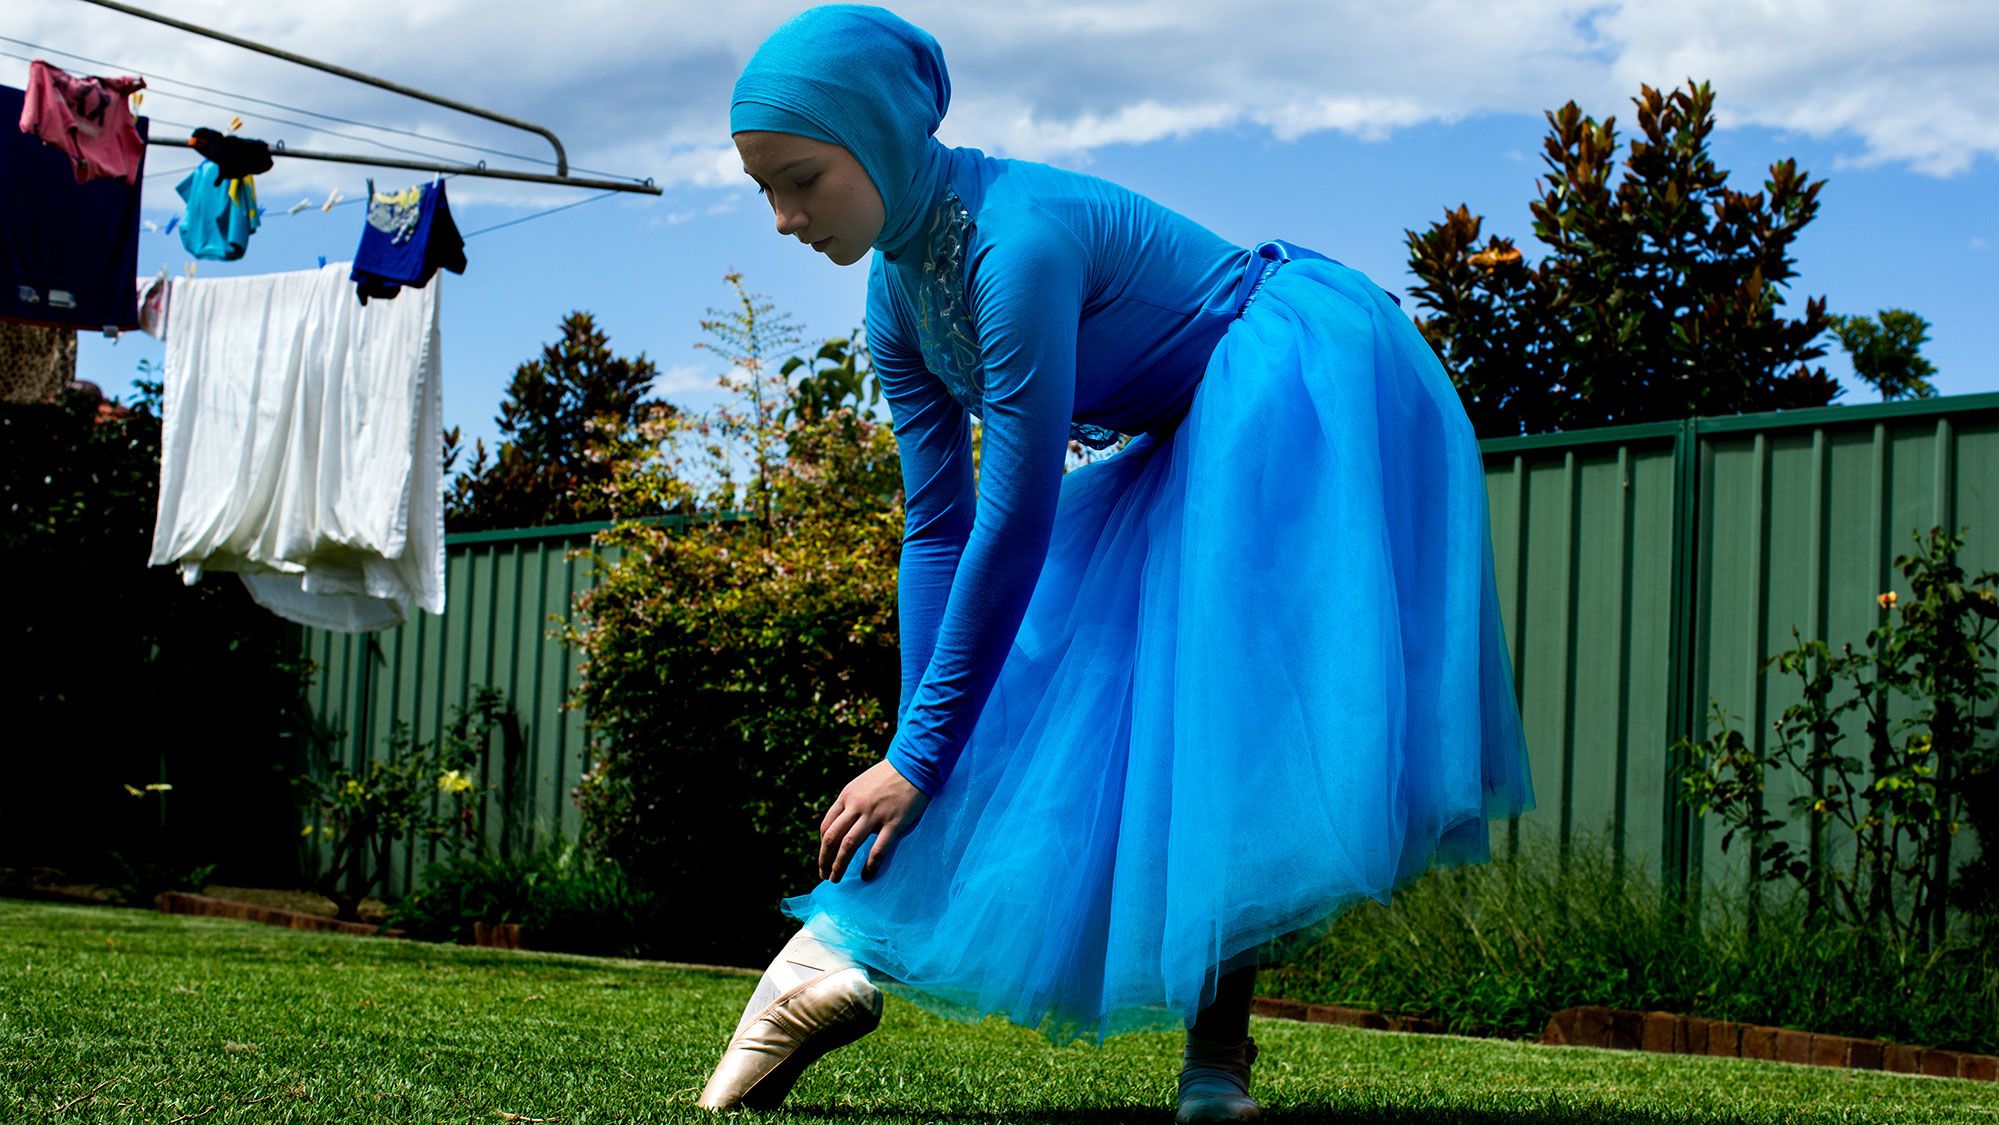 Stephanie Kurlow, a 14-year-old Sydney schoolgirl, practices ballet in her family's backyard on January 31.